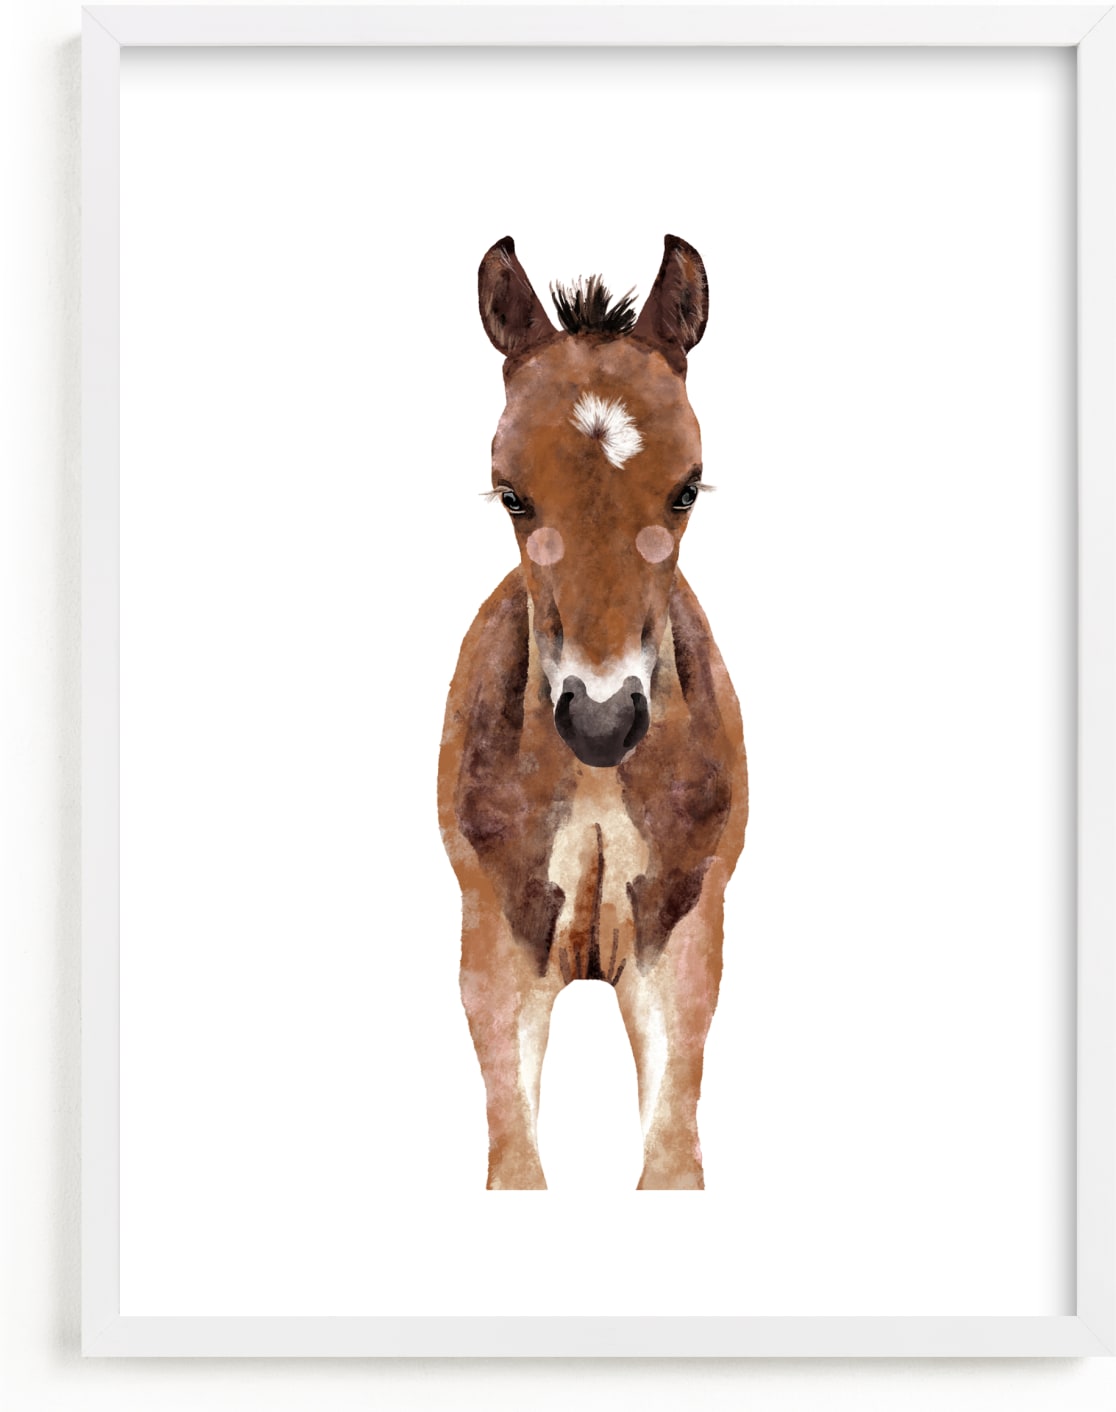 This is a brown art by Cass Loh called Baby Animal Horse.